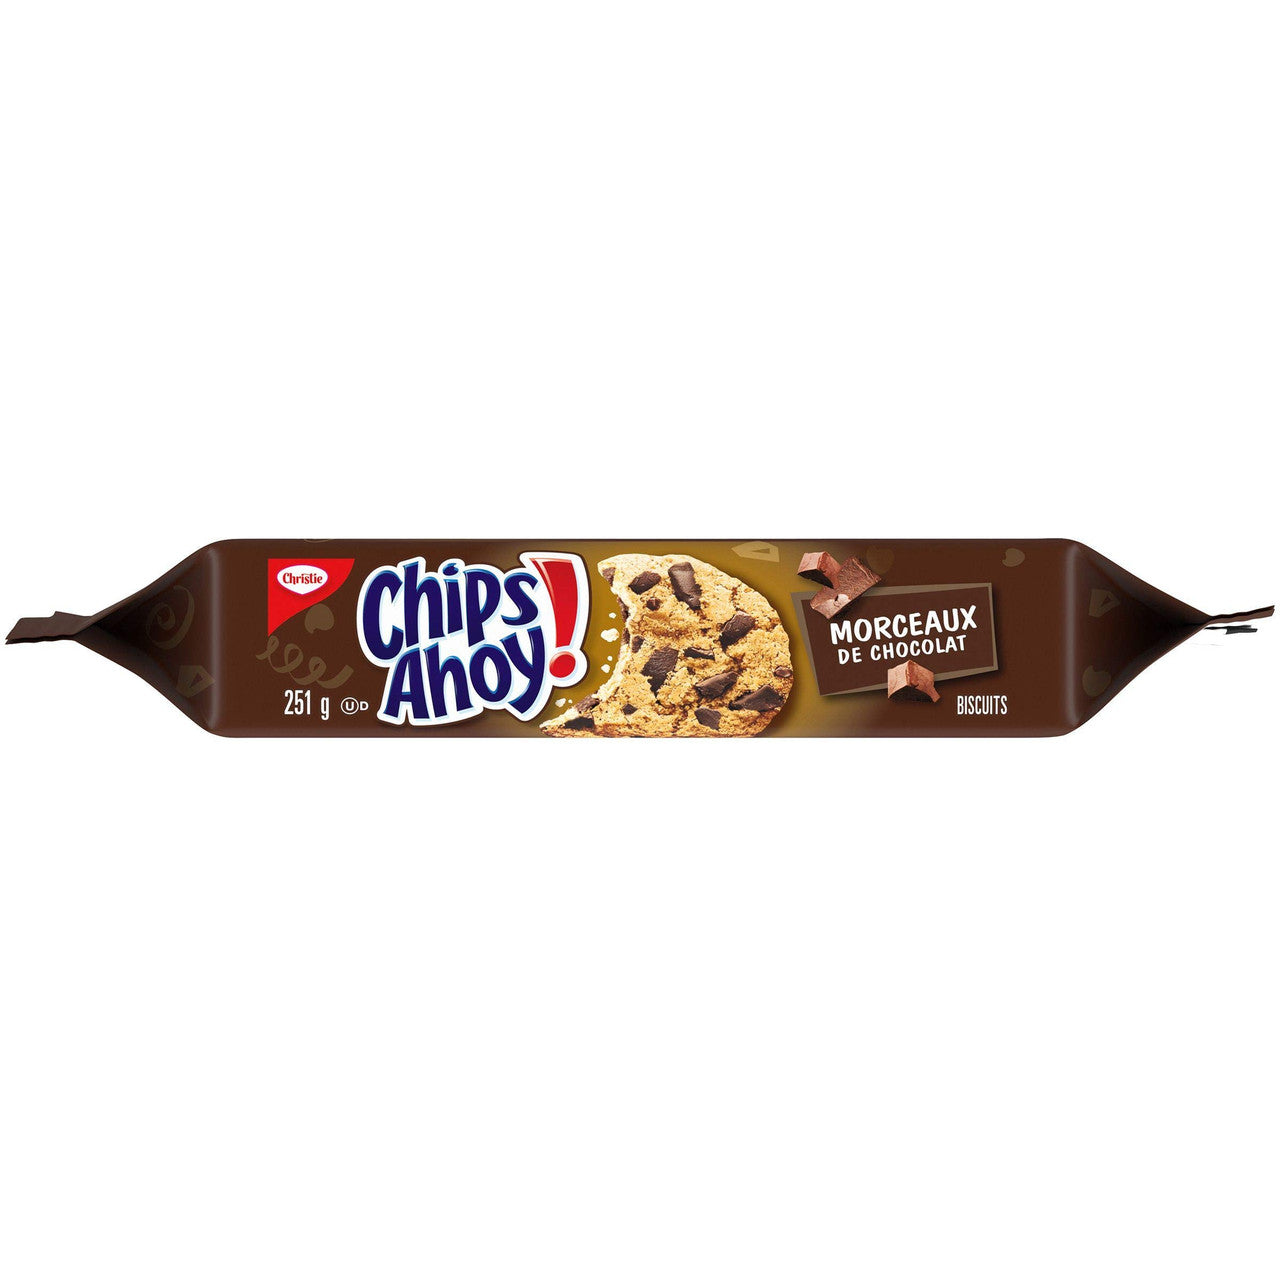 Christie Chips Ahoy! Chunks Chocolate-Chip - Cookies, 251g/8.9 oz. {Imported from Canada}